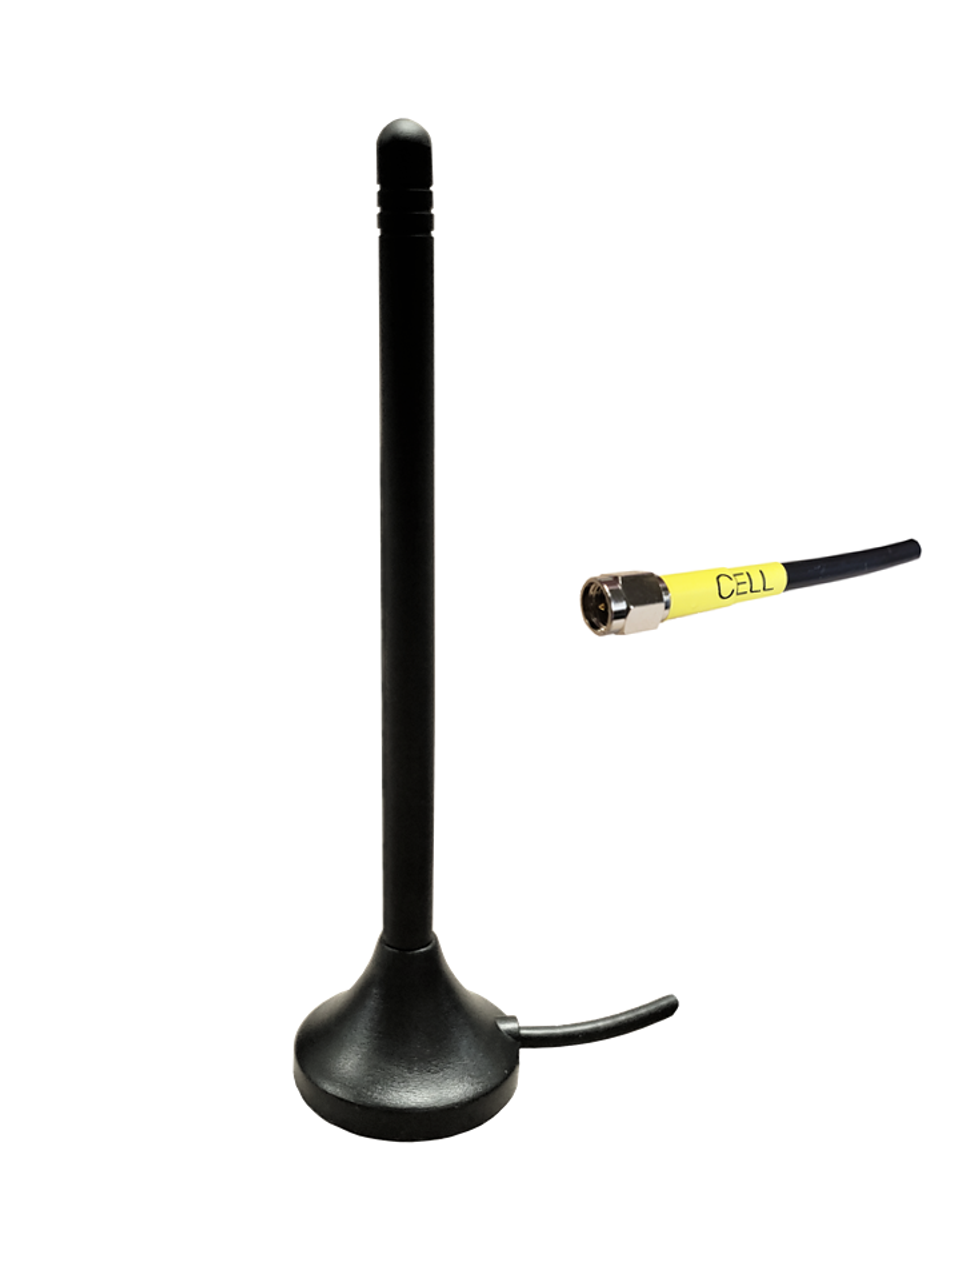 4.5" 3dB Omni-Directional External Antenna w/ Magnetic Mount for Inseego SKYUS-DS Modem